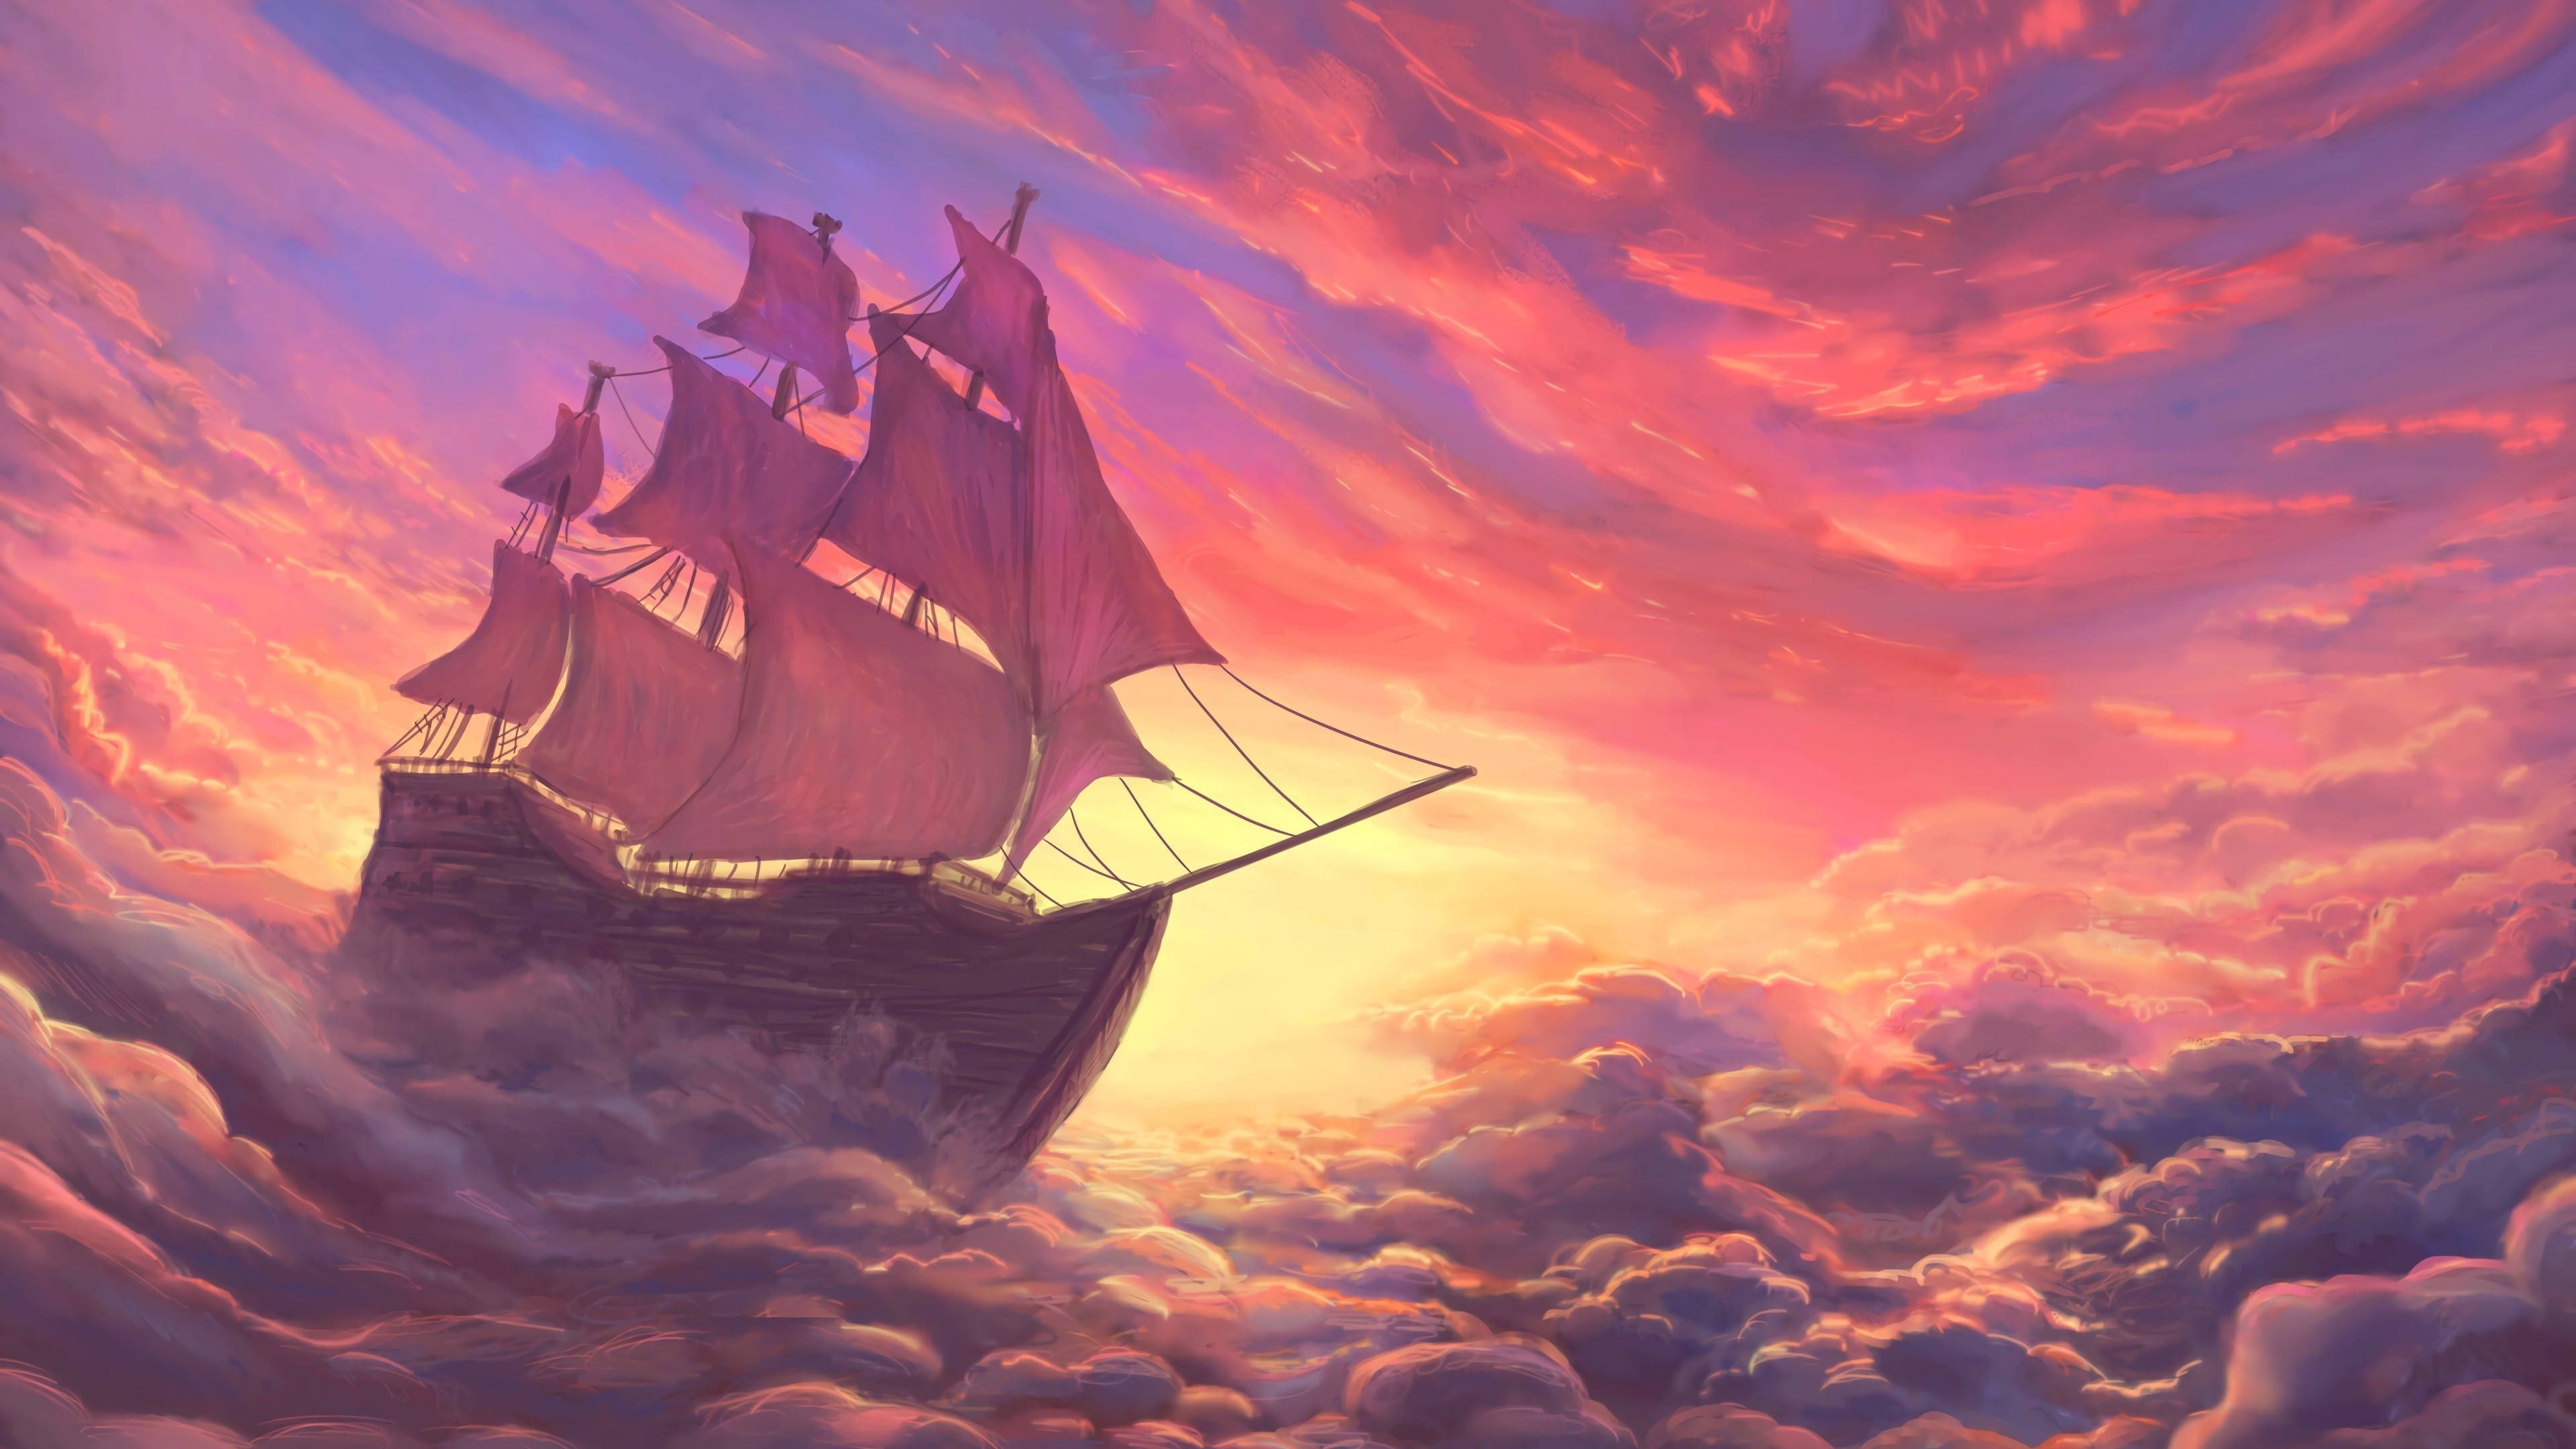 A ship sails through the clouds in a pink and blue sky - Pirate